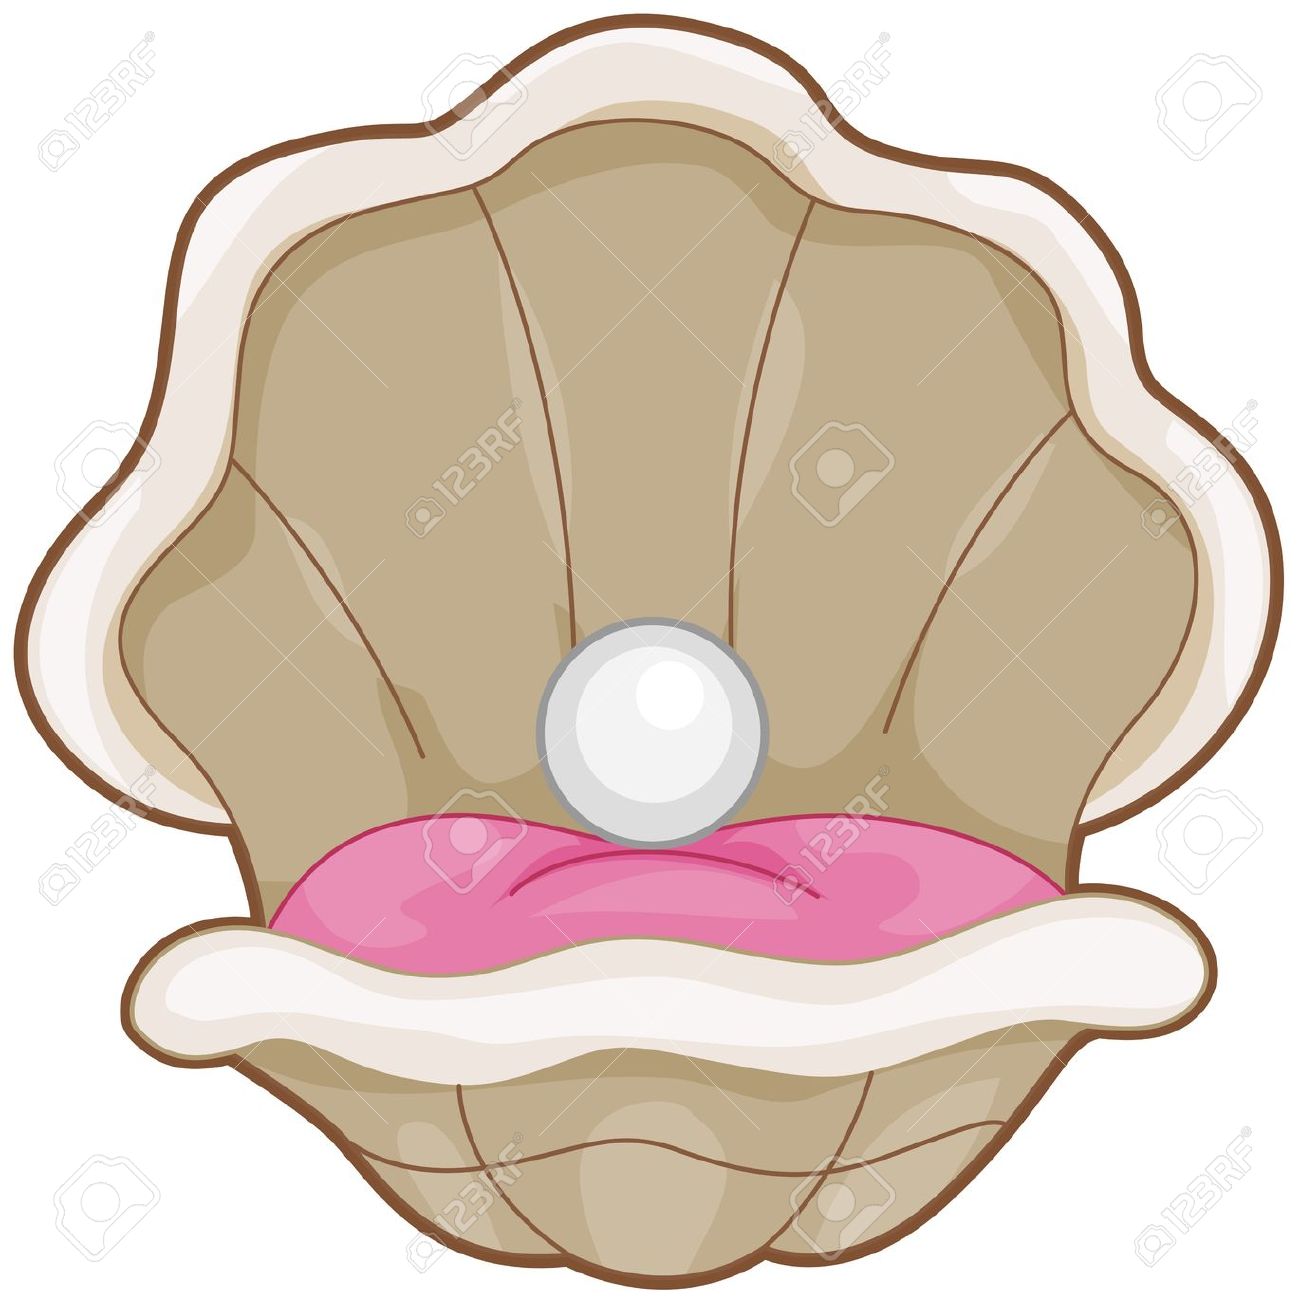 Oyster Cartoon PNG - 73253